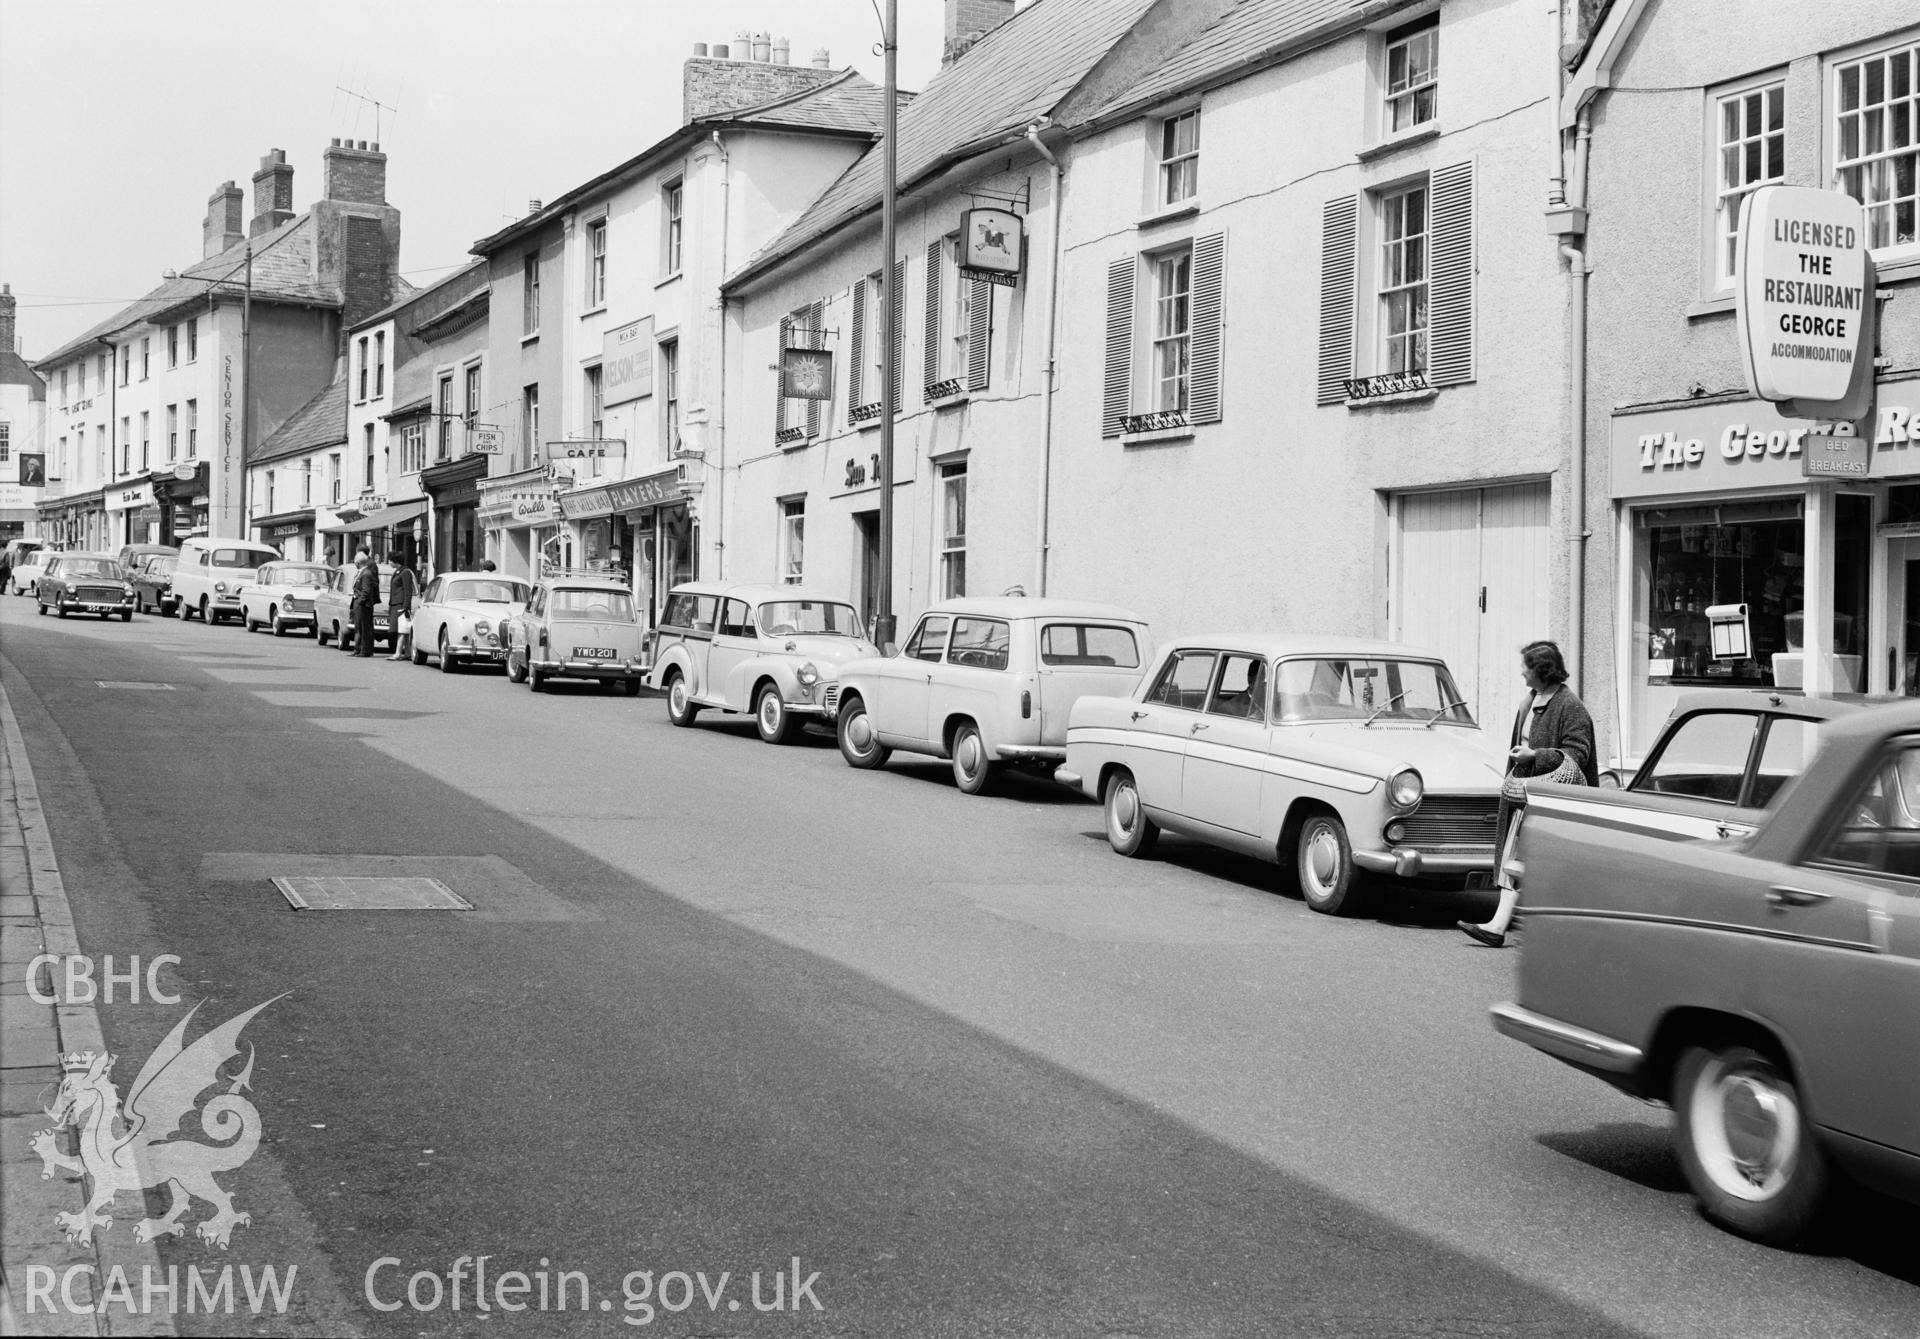 Black and white photograph showing Cross Street, Abergavenny taken by E.G. Holt 1965.